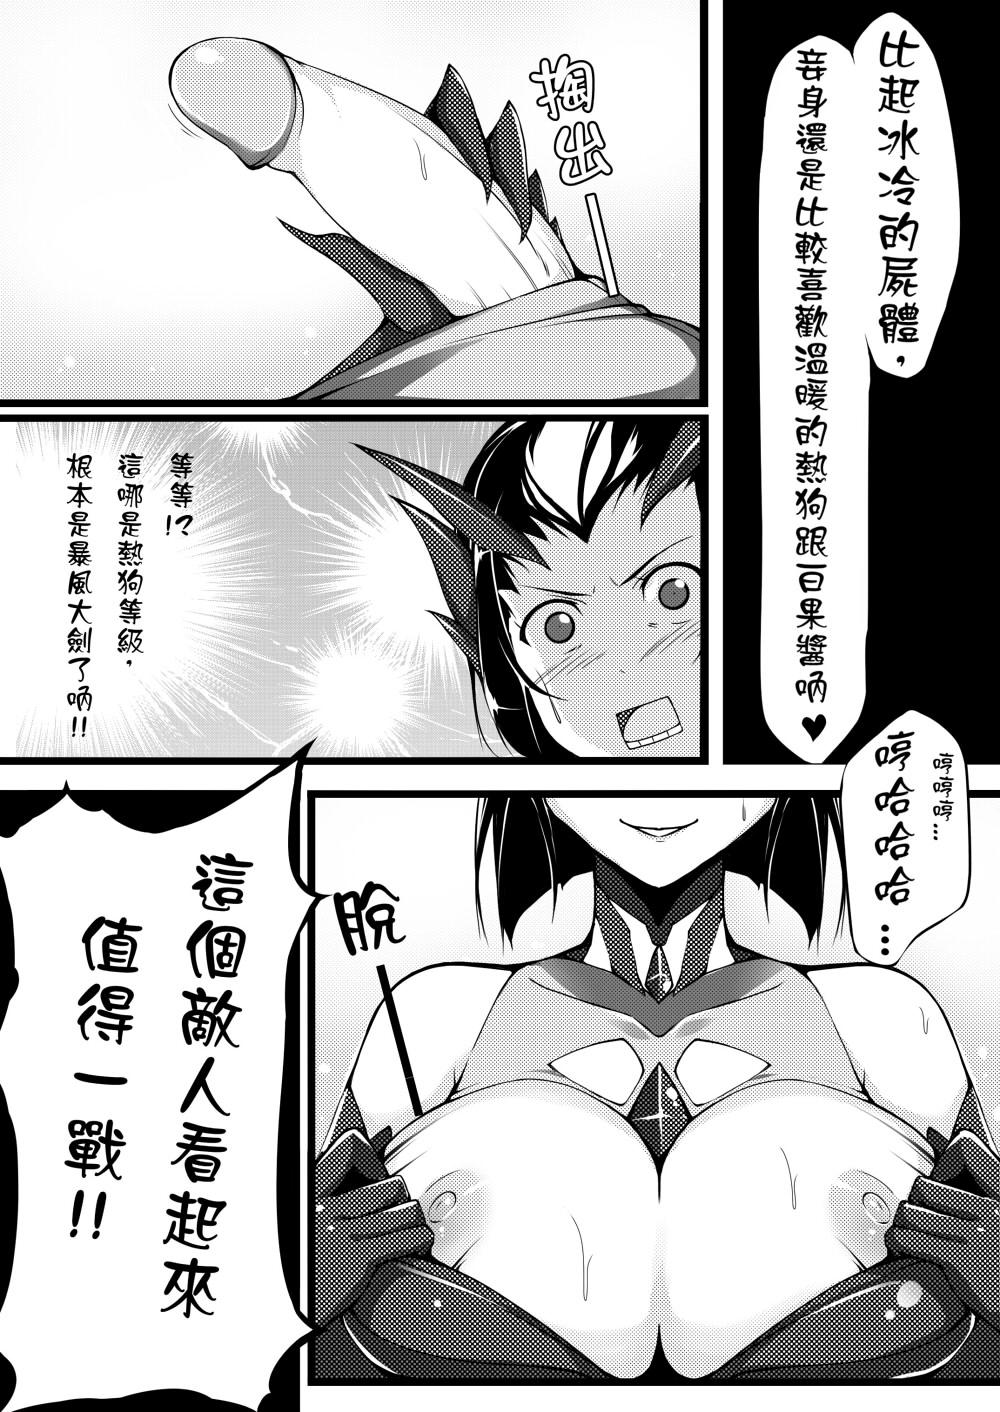 Police 蜘蛛王女-Darkness - League of legends Com - Page 4